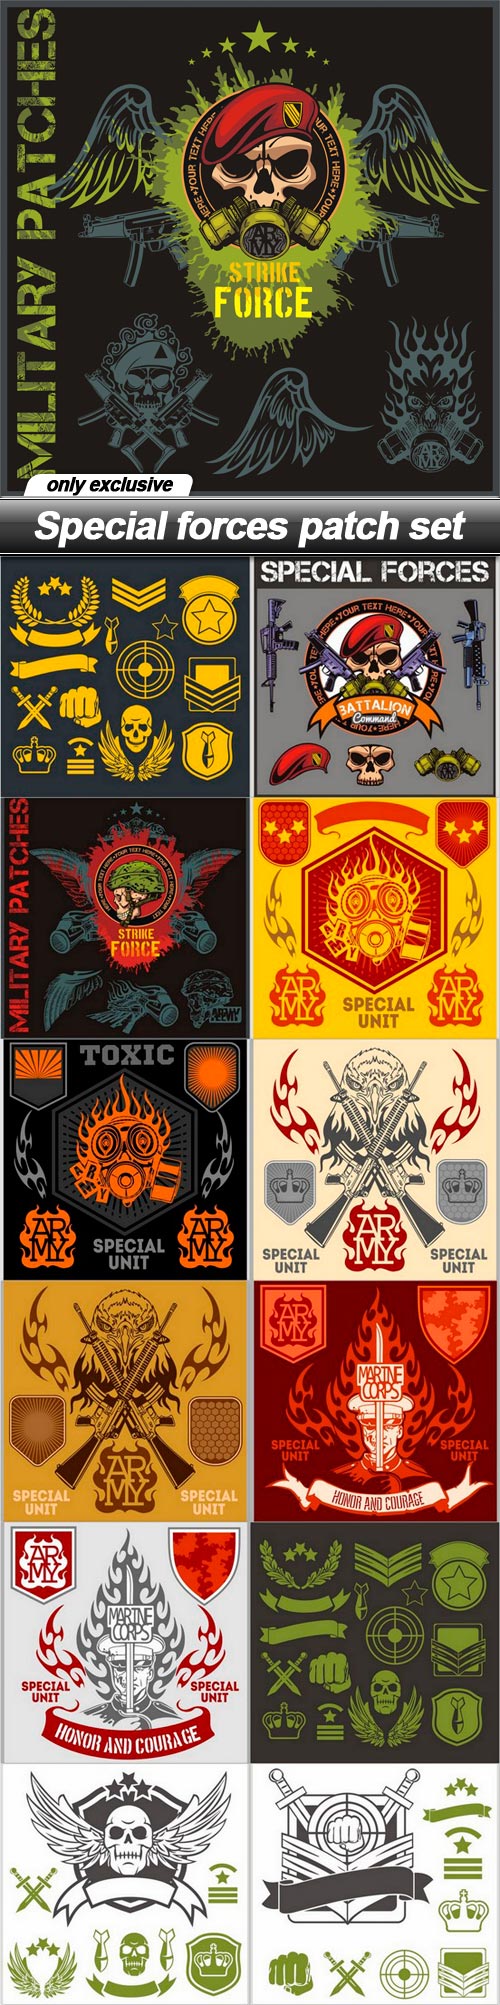 Special forces patch set - 13 EPS